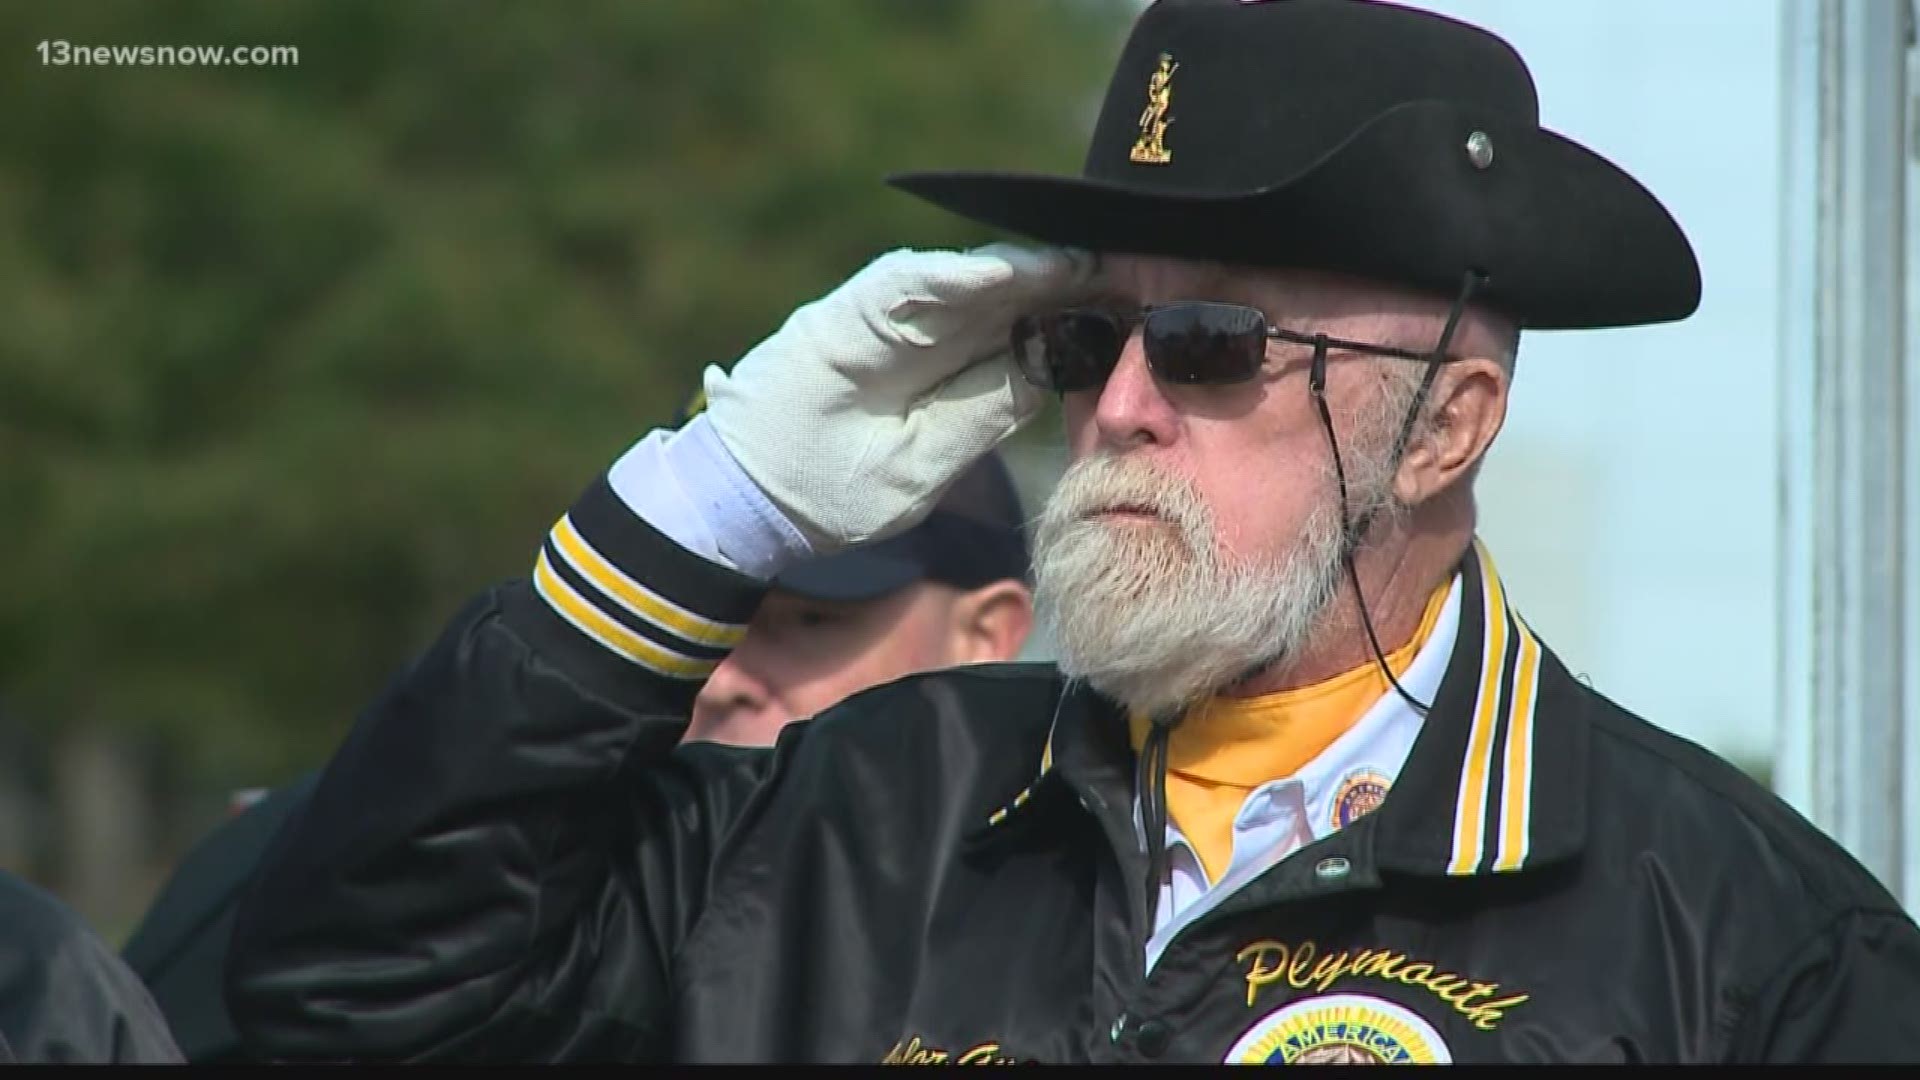 After the parades, veterans were honored in more solemn services across the Hampton Roads area.